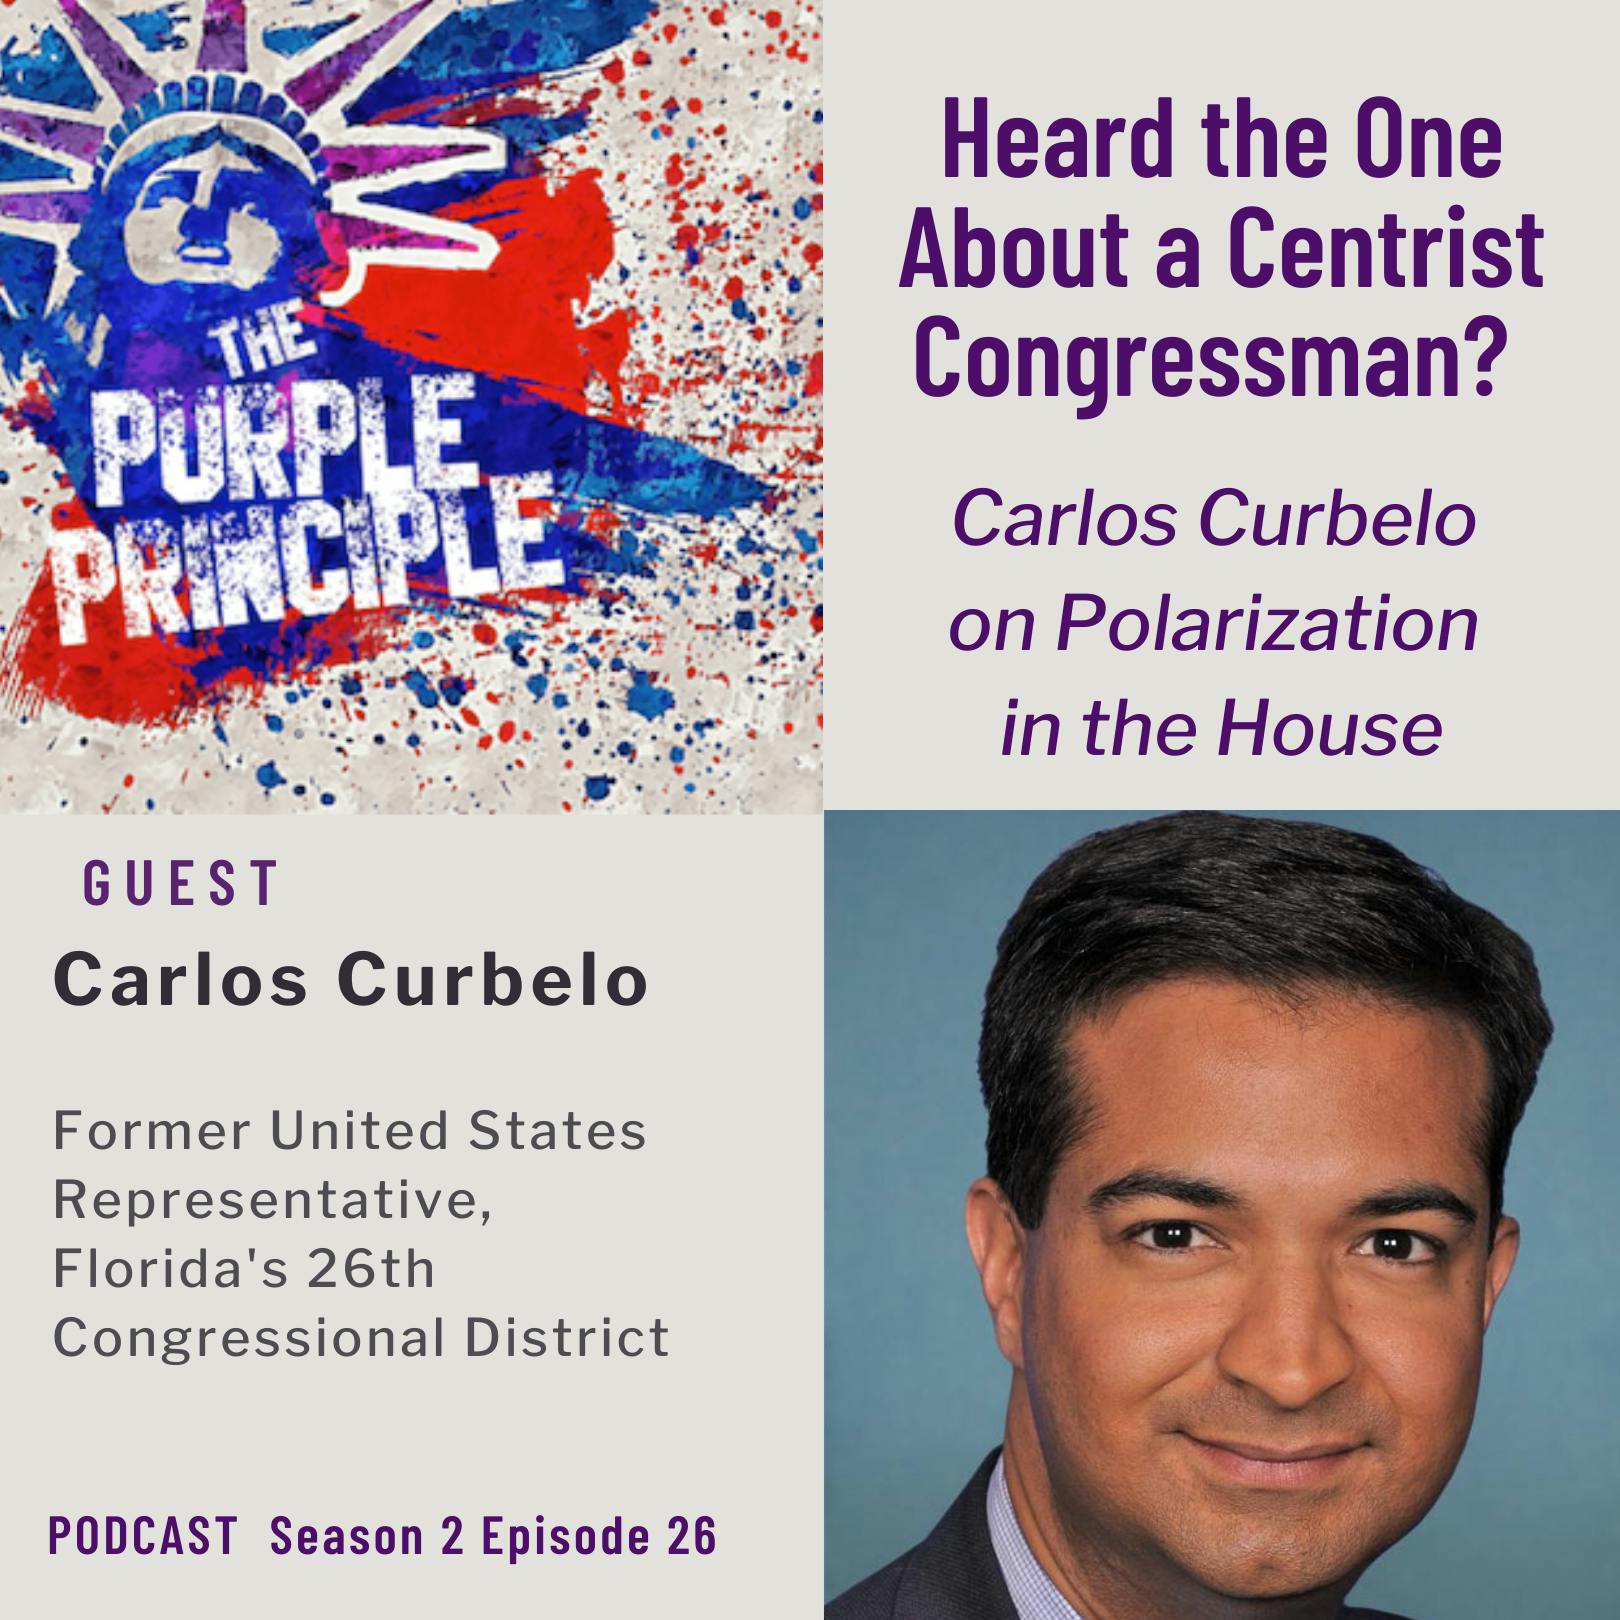 Heard the One About a Centrist Congressman? Carlos Curbelo on Polarization in the House